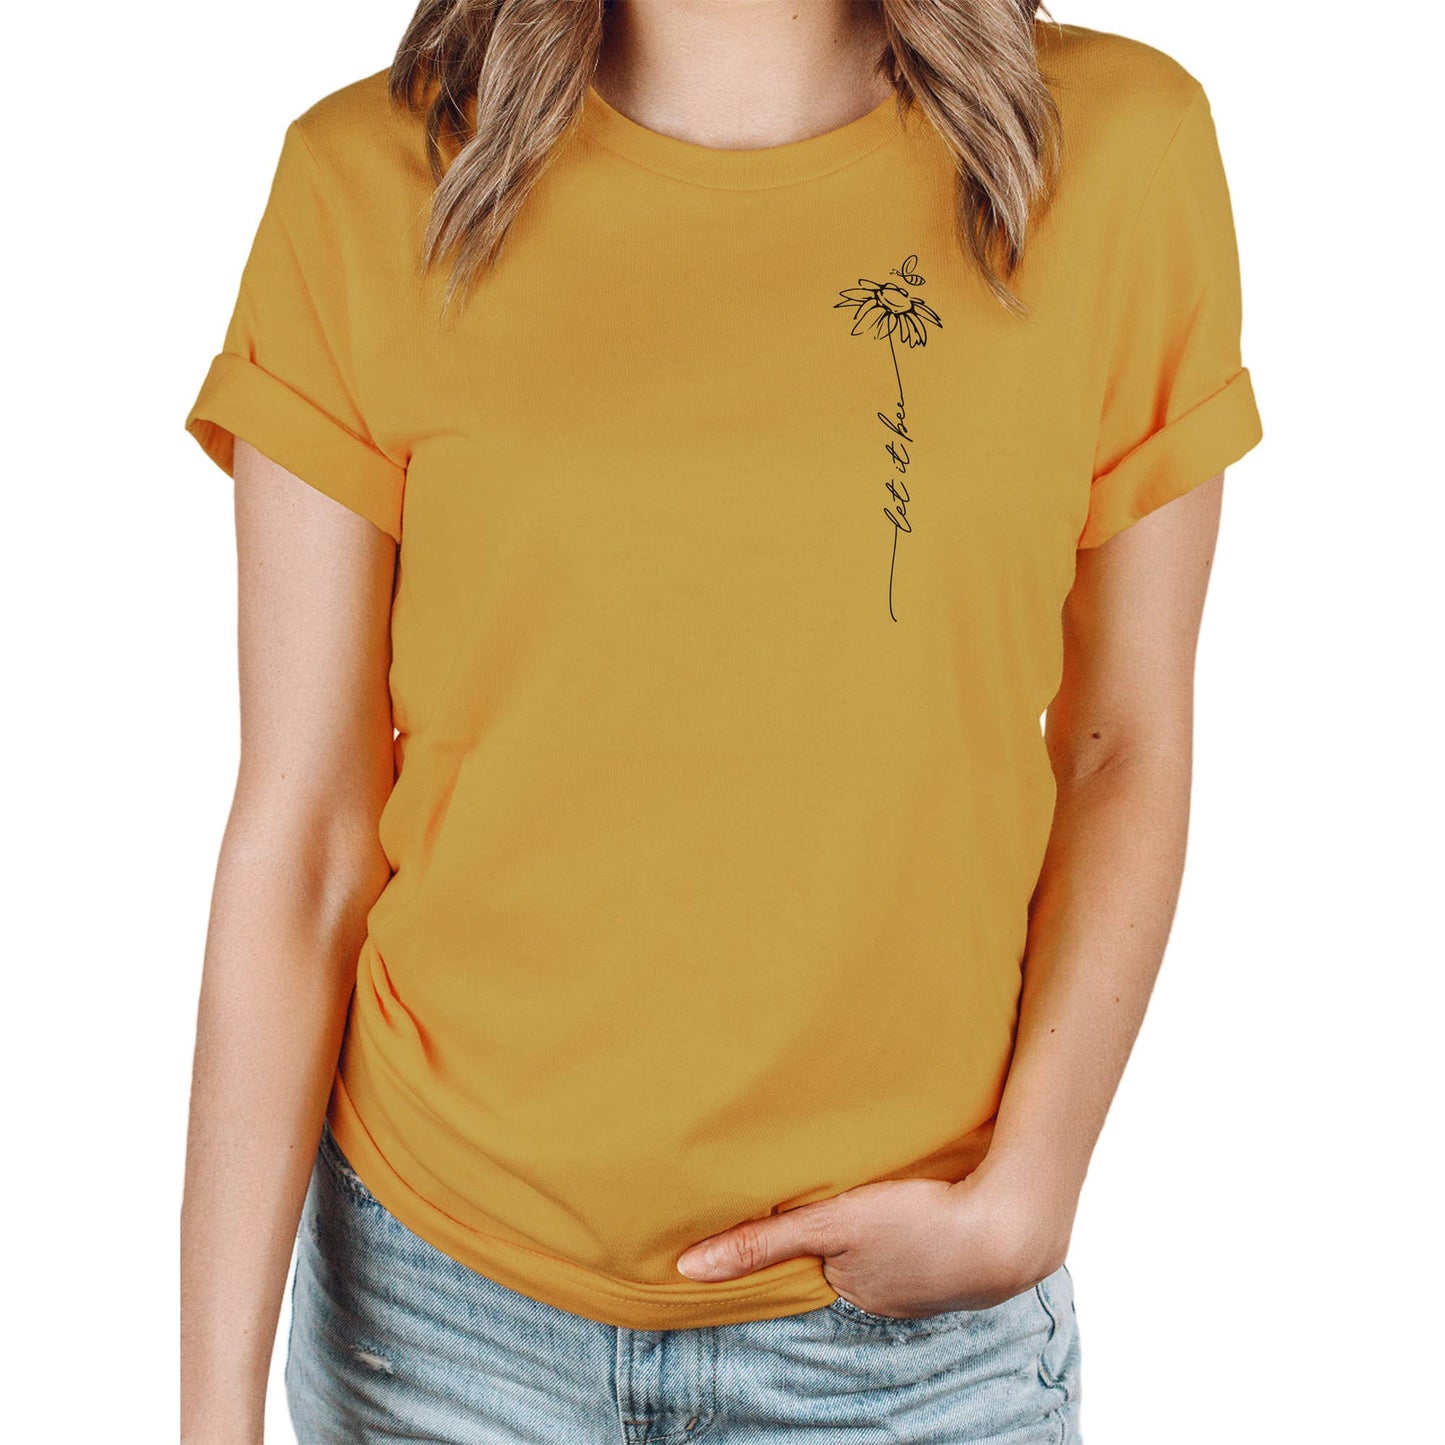 Let It Bee Shirt | Shirt That Protects Bees | Bee Shirt